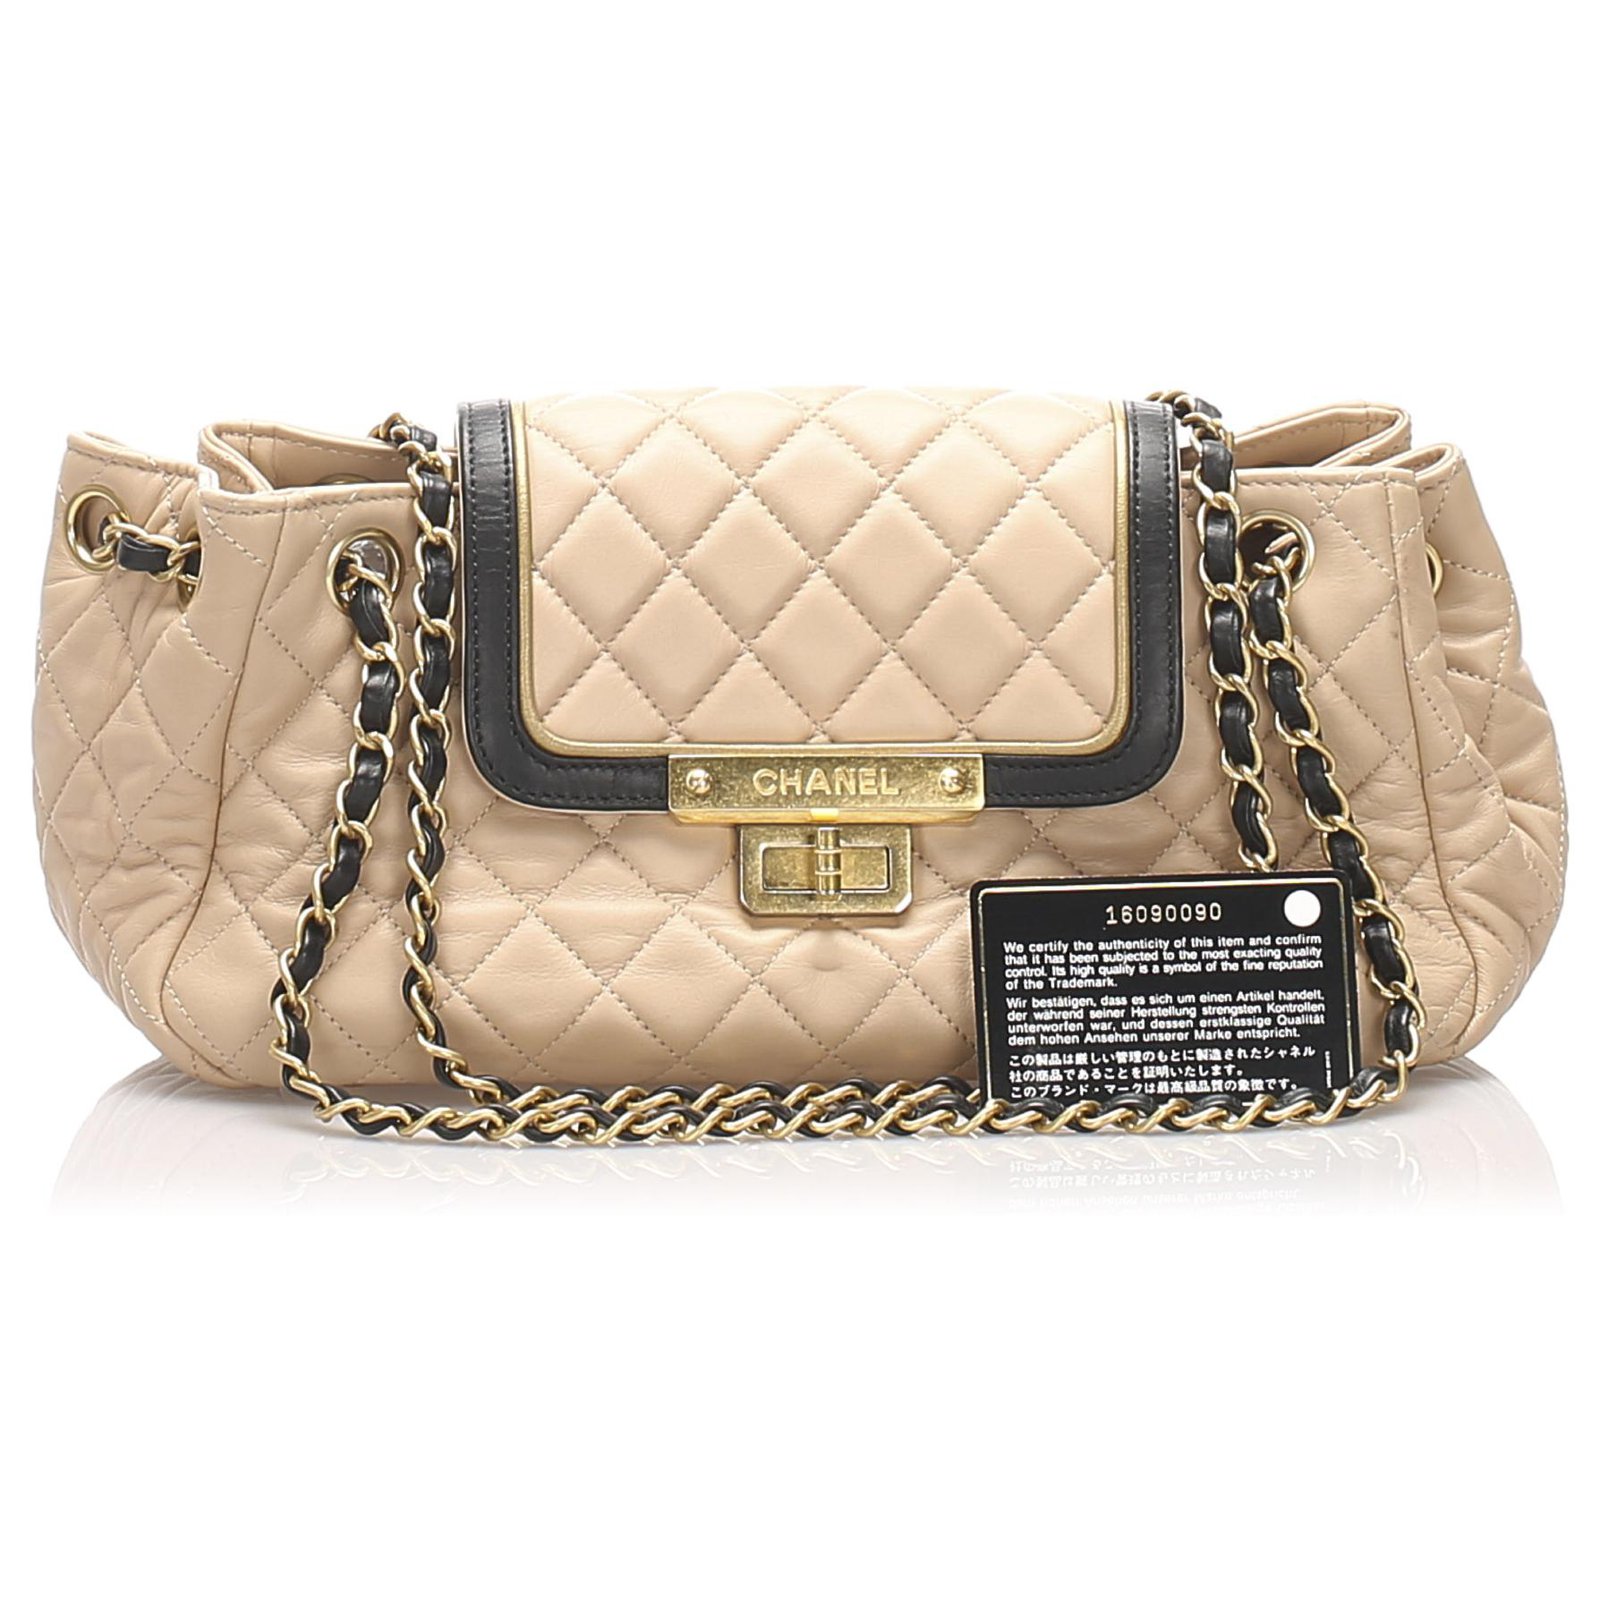 Authentic Chanel Accordion Small Shoulder Bag I Black & Beige Chocolate Bar  Leather I Excellent